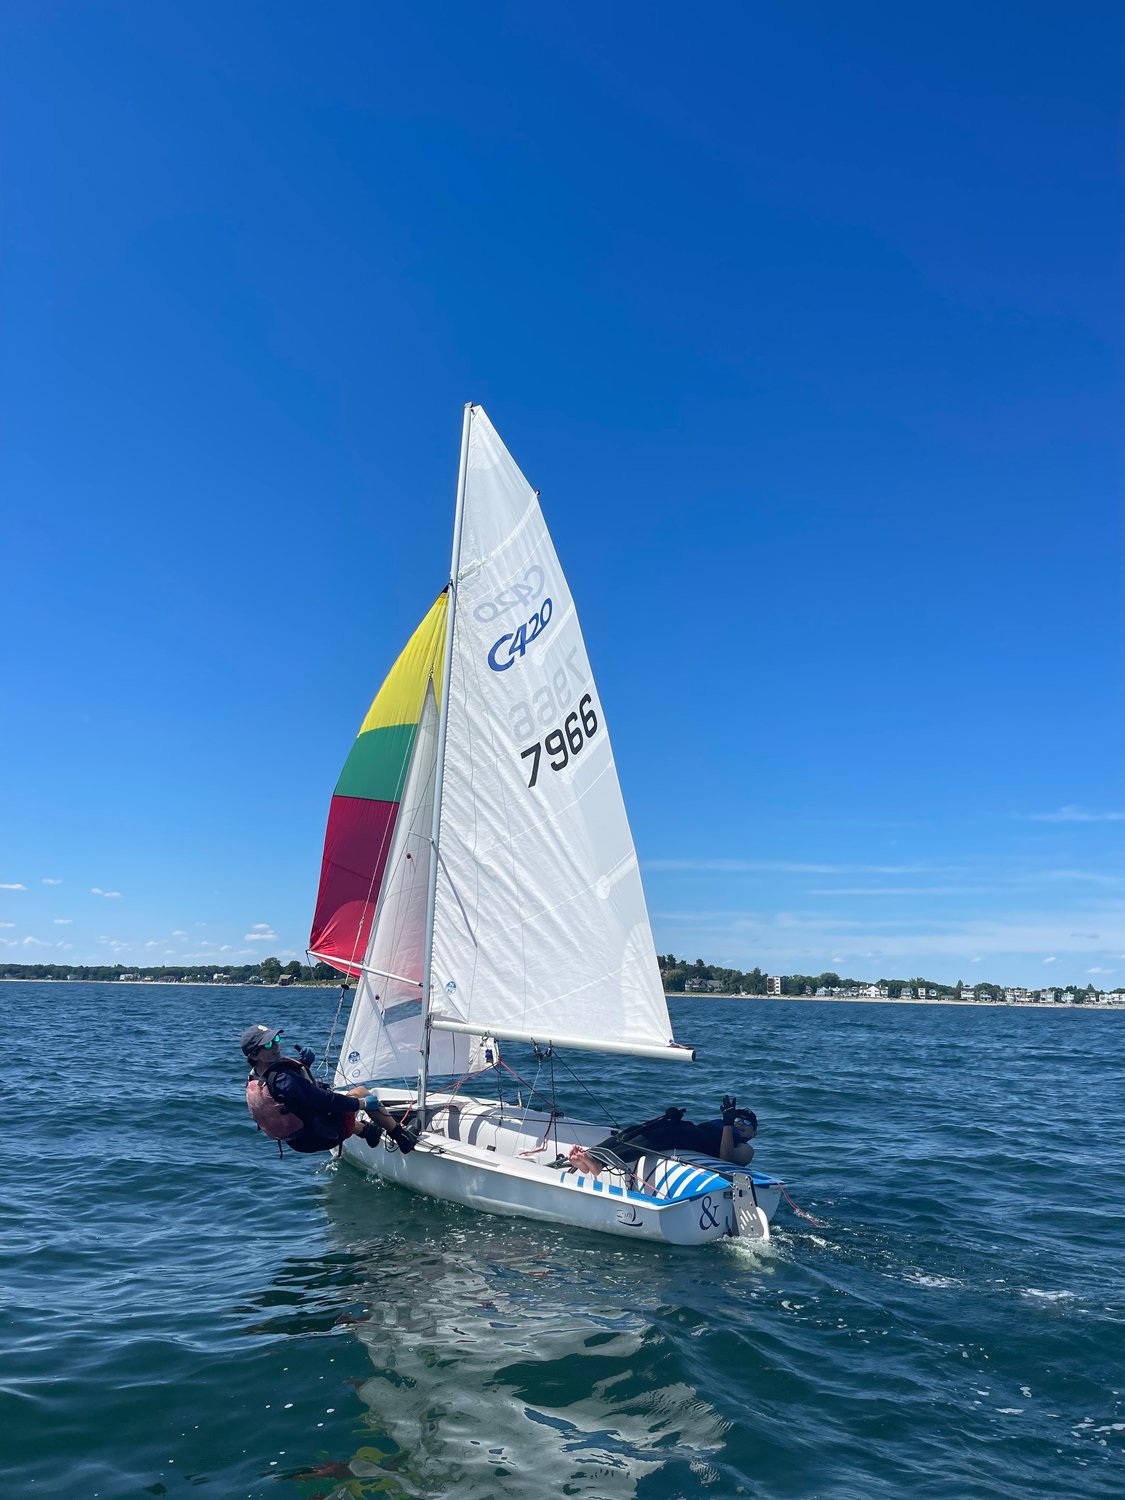 Mark Adipietro and Tucker Peters are friends who sail often in Westport, Connecticut. To improve their skills, they took an advanced sailing course at Oakcliff Sailing in Oyster Bay.